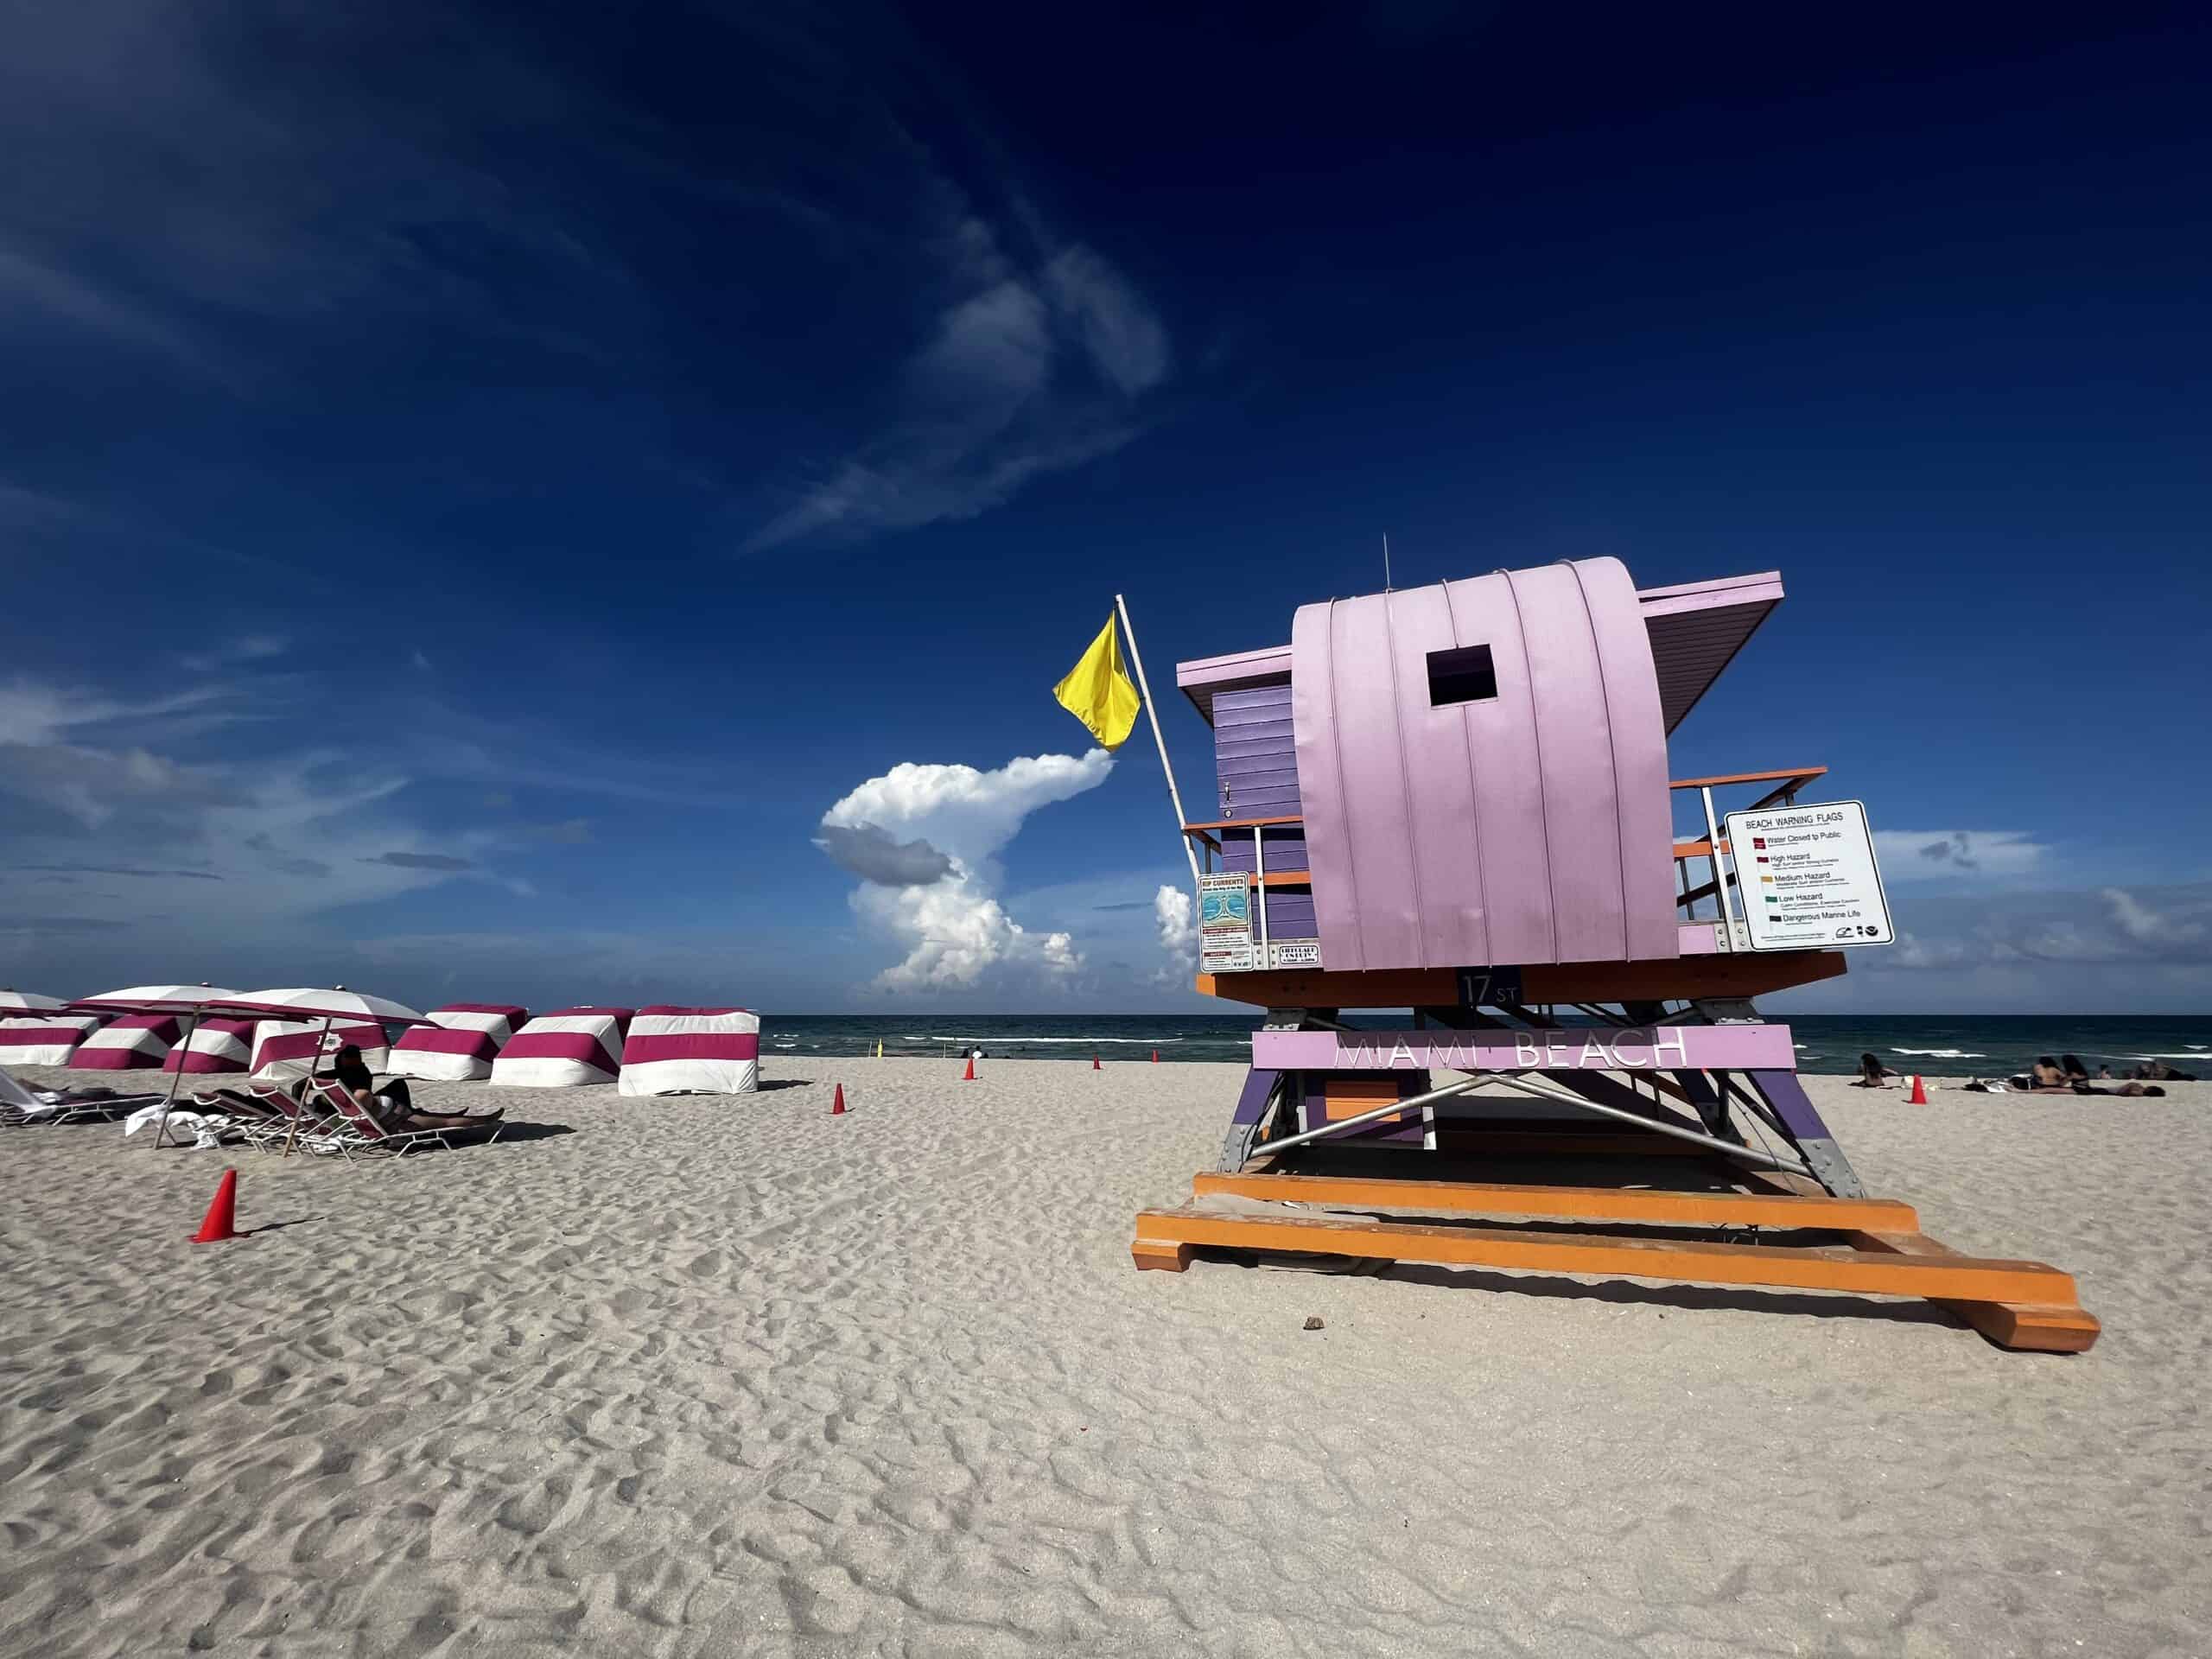 One of the famous life guard stations in Miami Beach, a bright pink one on the warm light sands